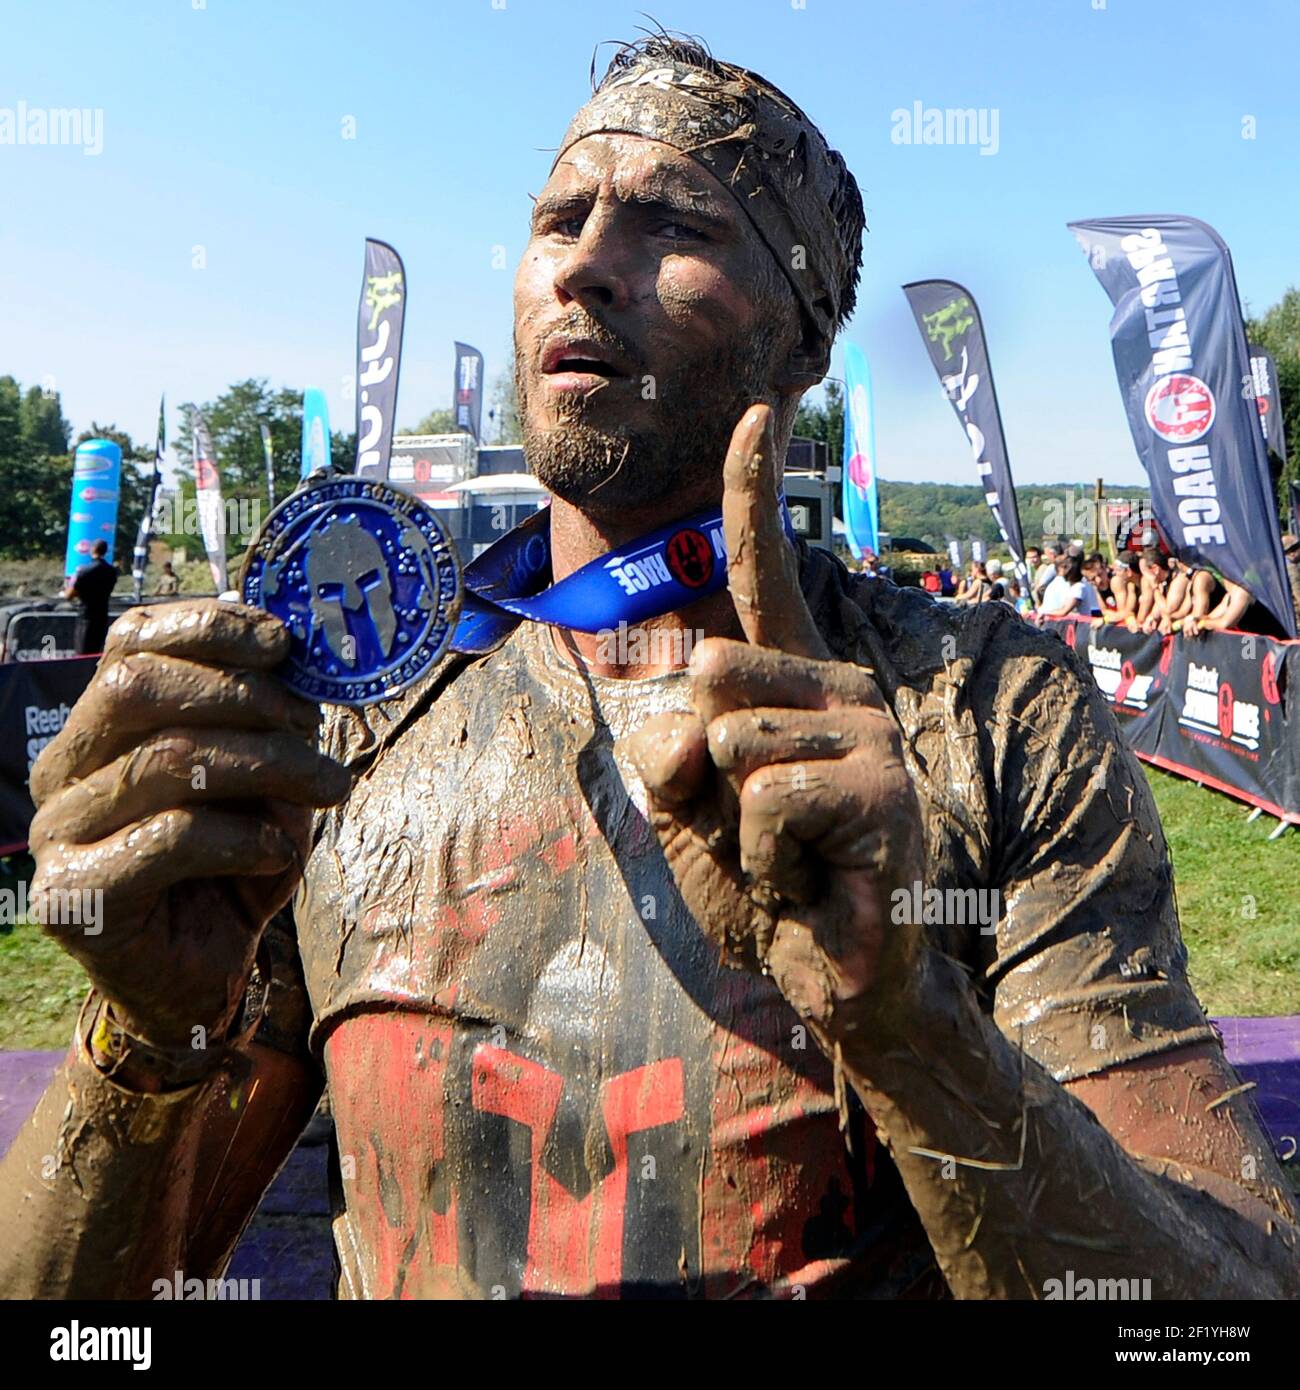 The French boxer Alexis Vastine shows his medal after the finish line of  the Reebok Spartan Race in Paris, on September 13, 2014. The Spartan Race  is a race in the mud